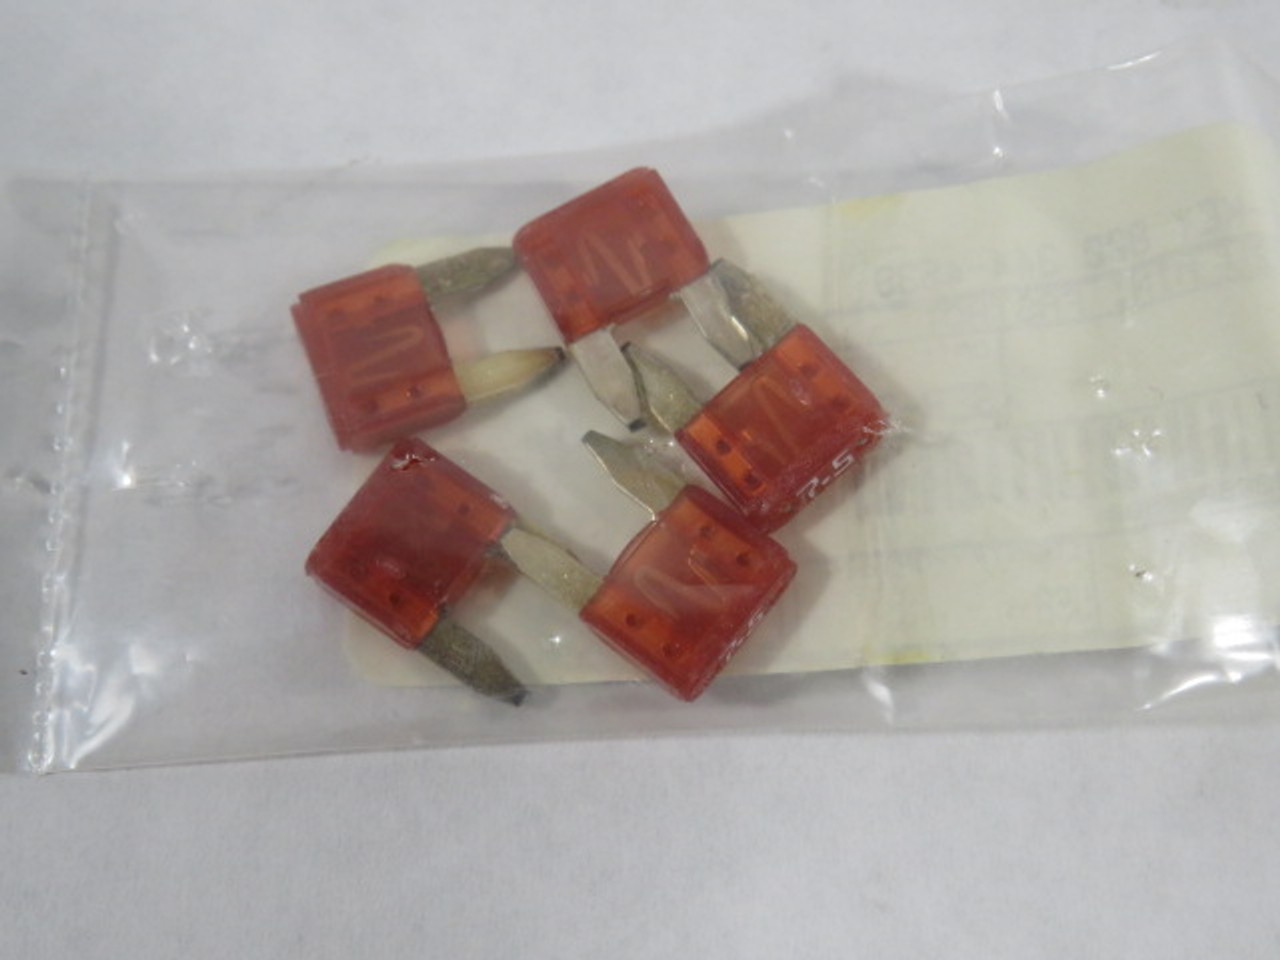 Littelfuse 029707.5WXNZ Automotive DC Fuse Blade 7.5A 32V Lot of 5 USED